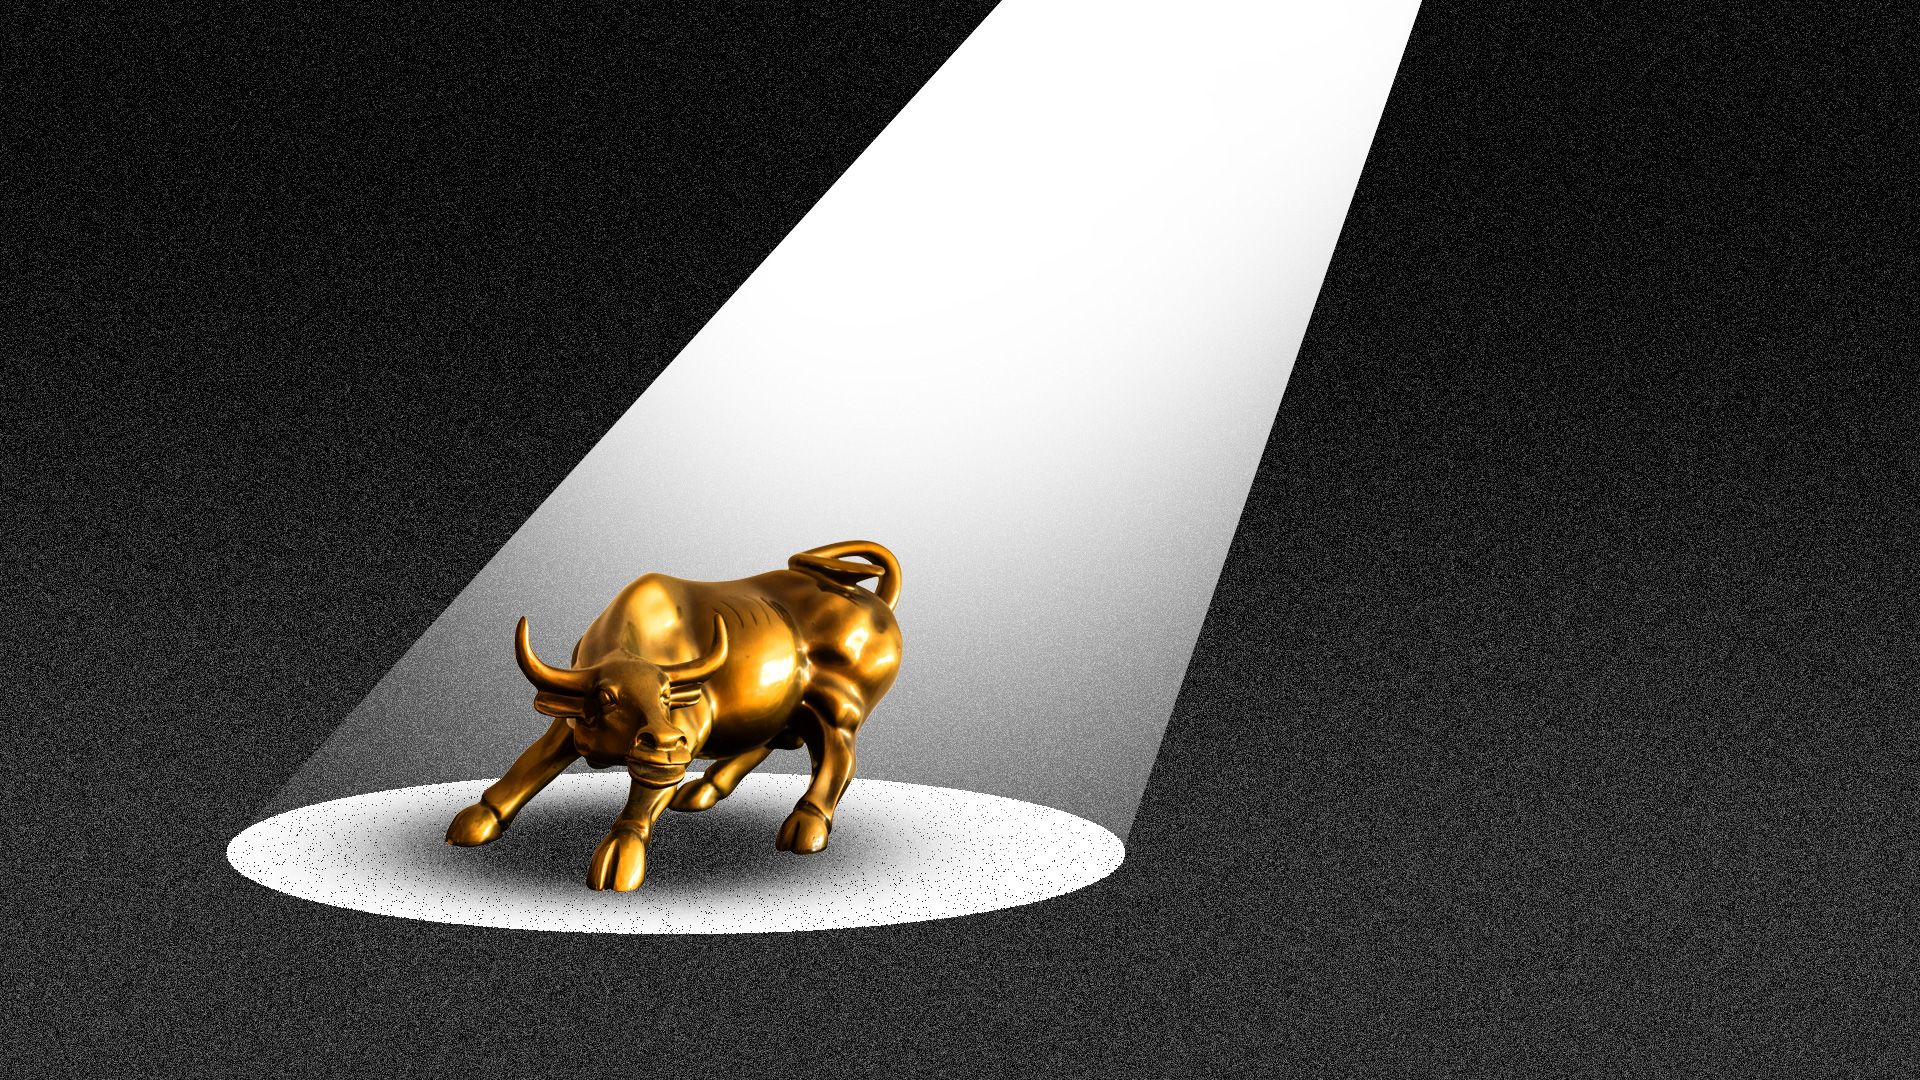 The Wall Street bull being illuminated by a spotlight